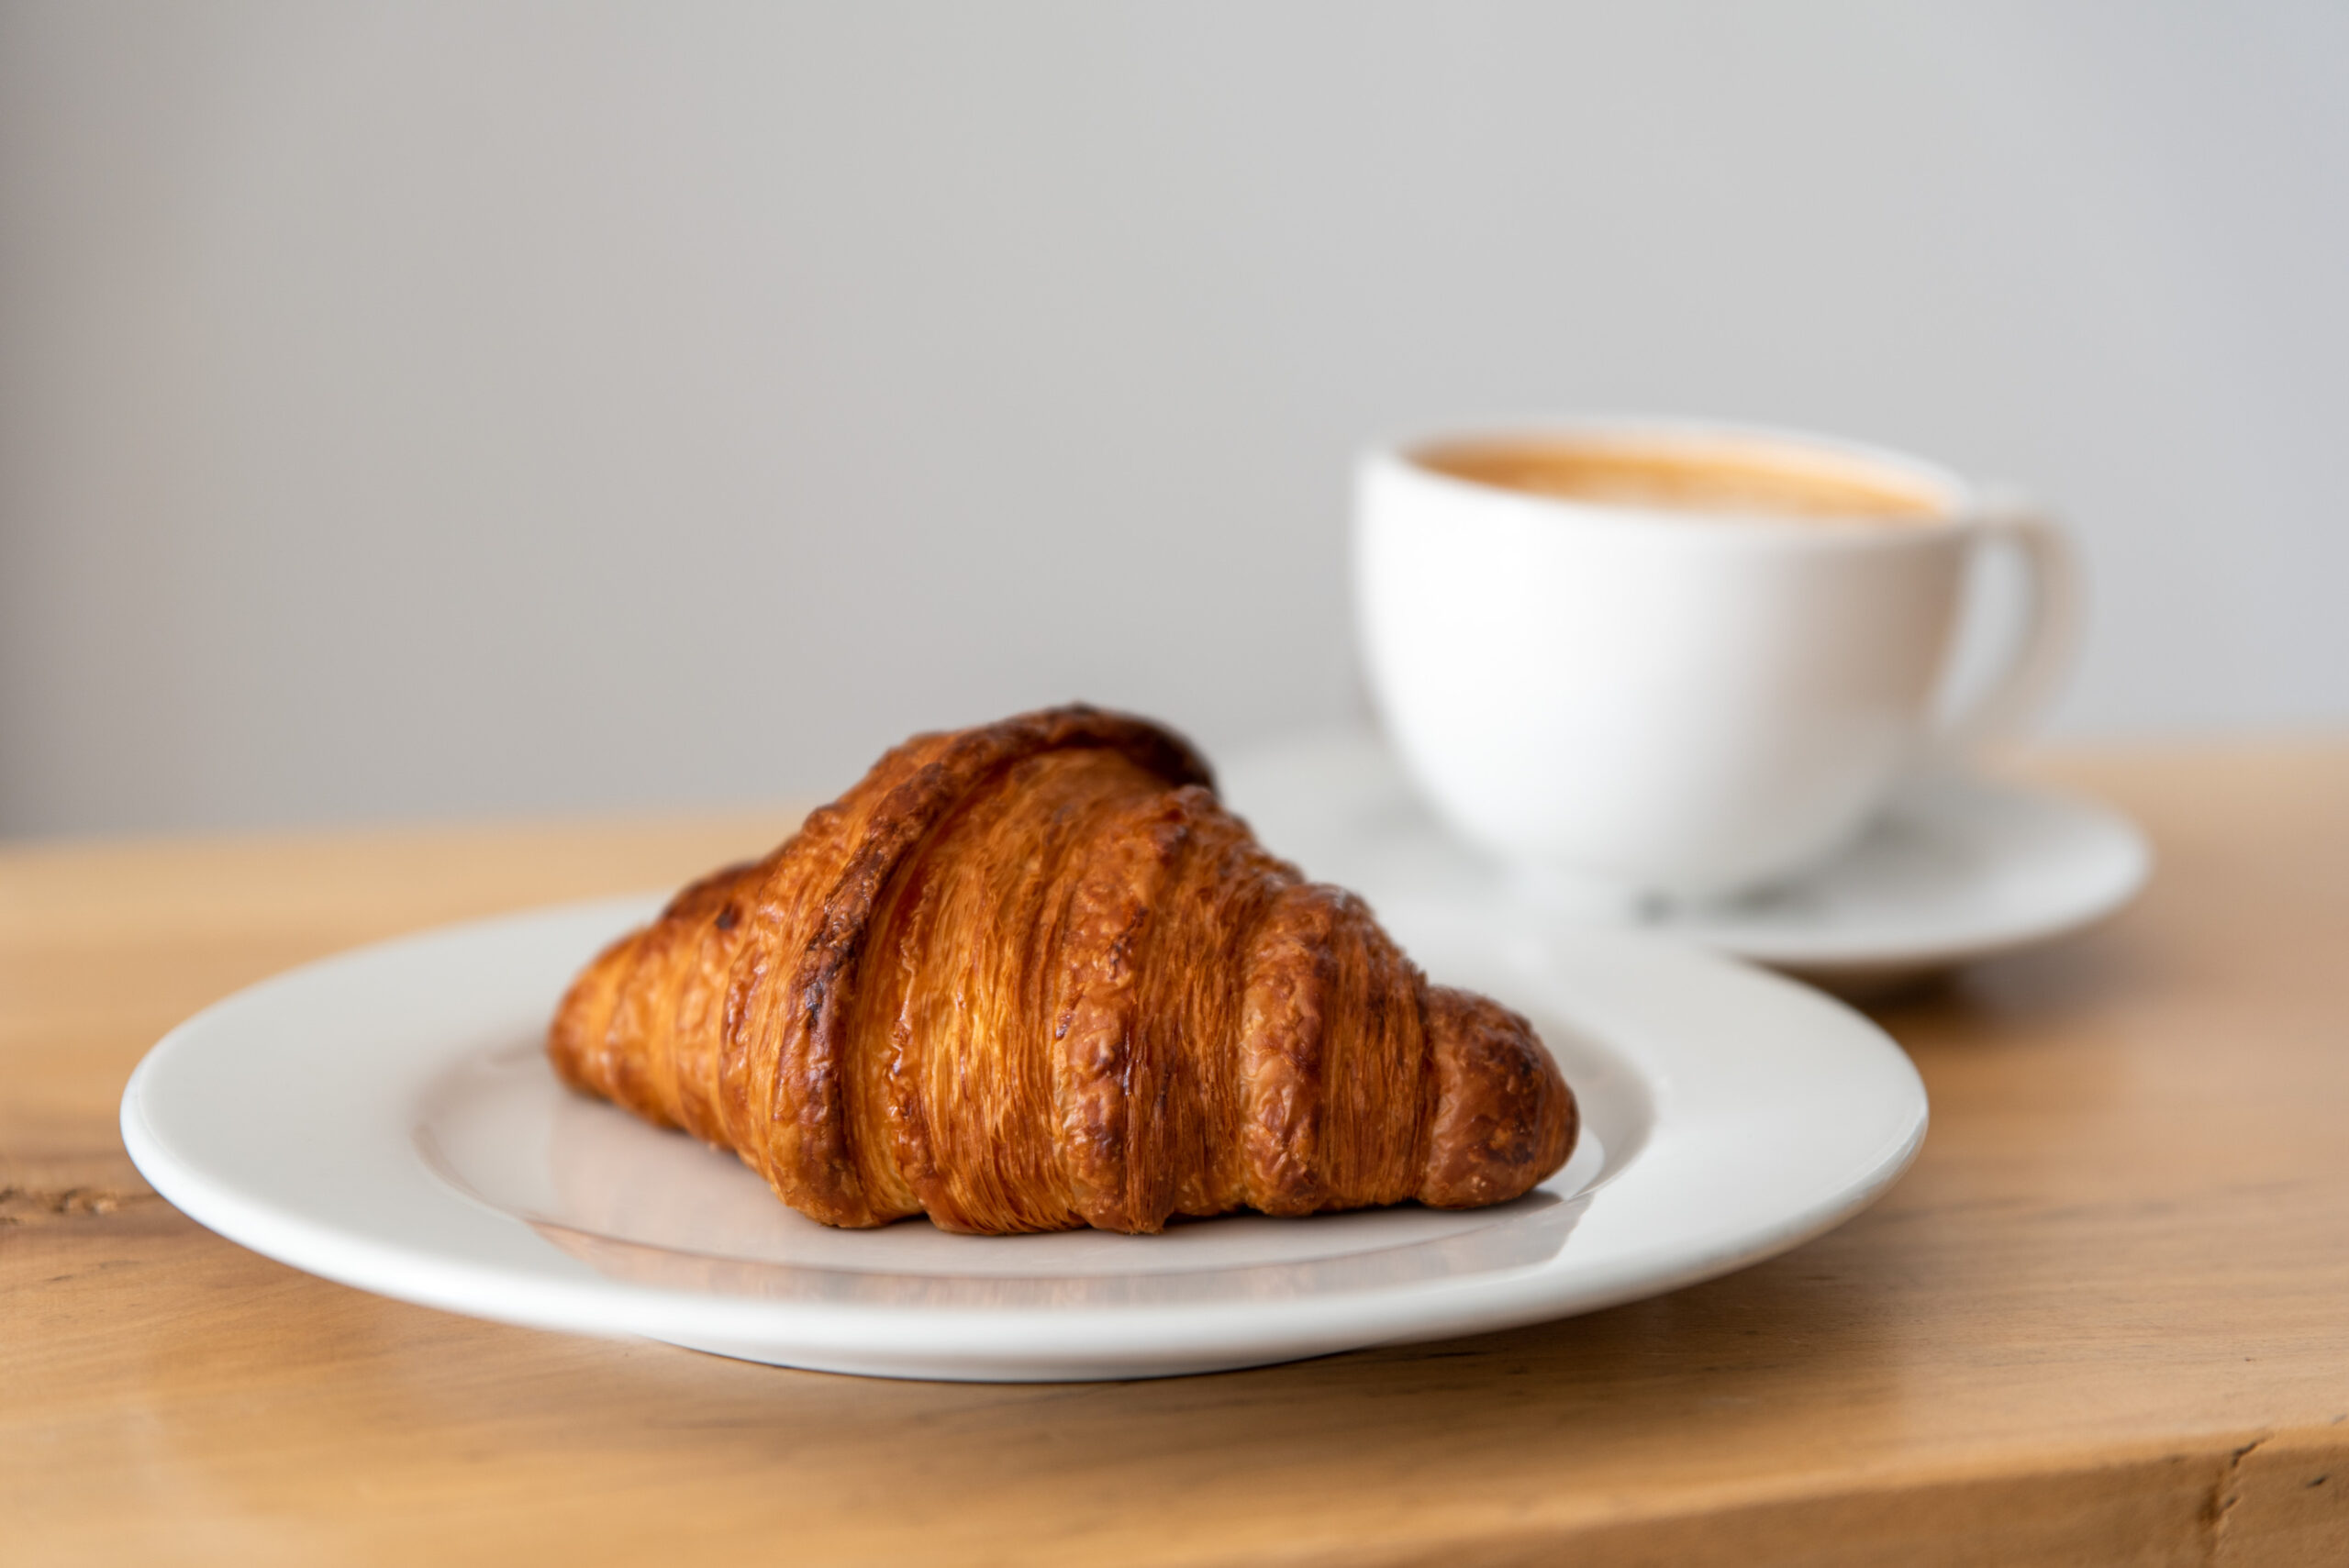 Butter Croissant made by Reverie Coffee Roasters' bakery, Founders Bakery.